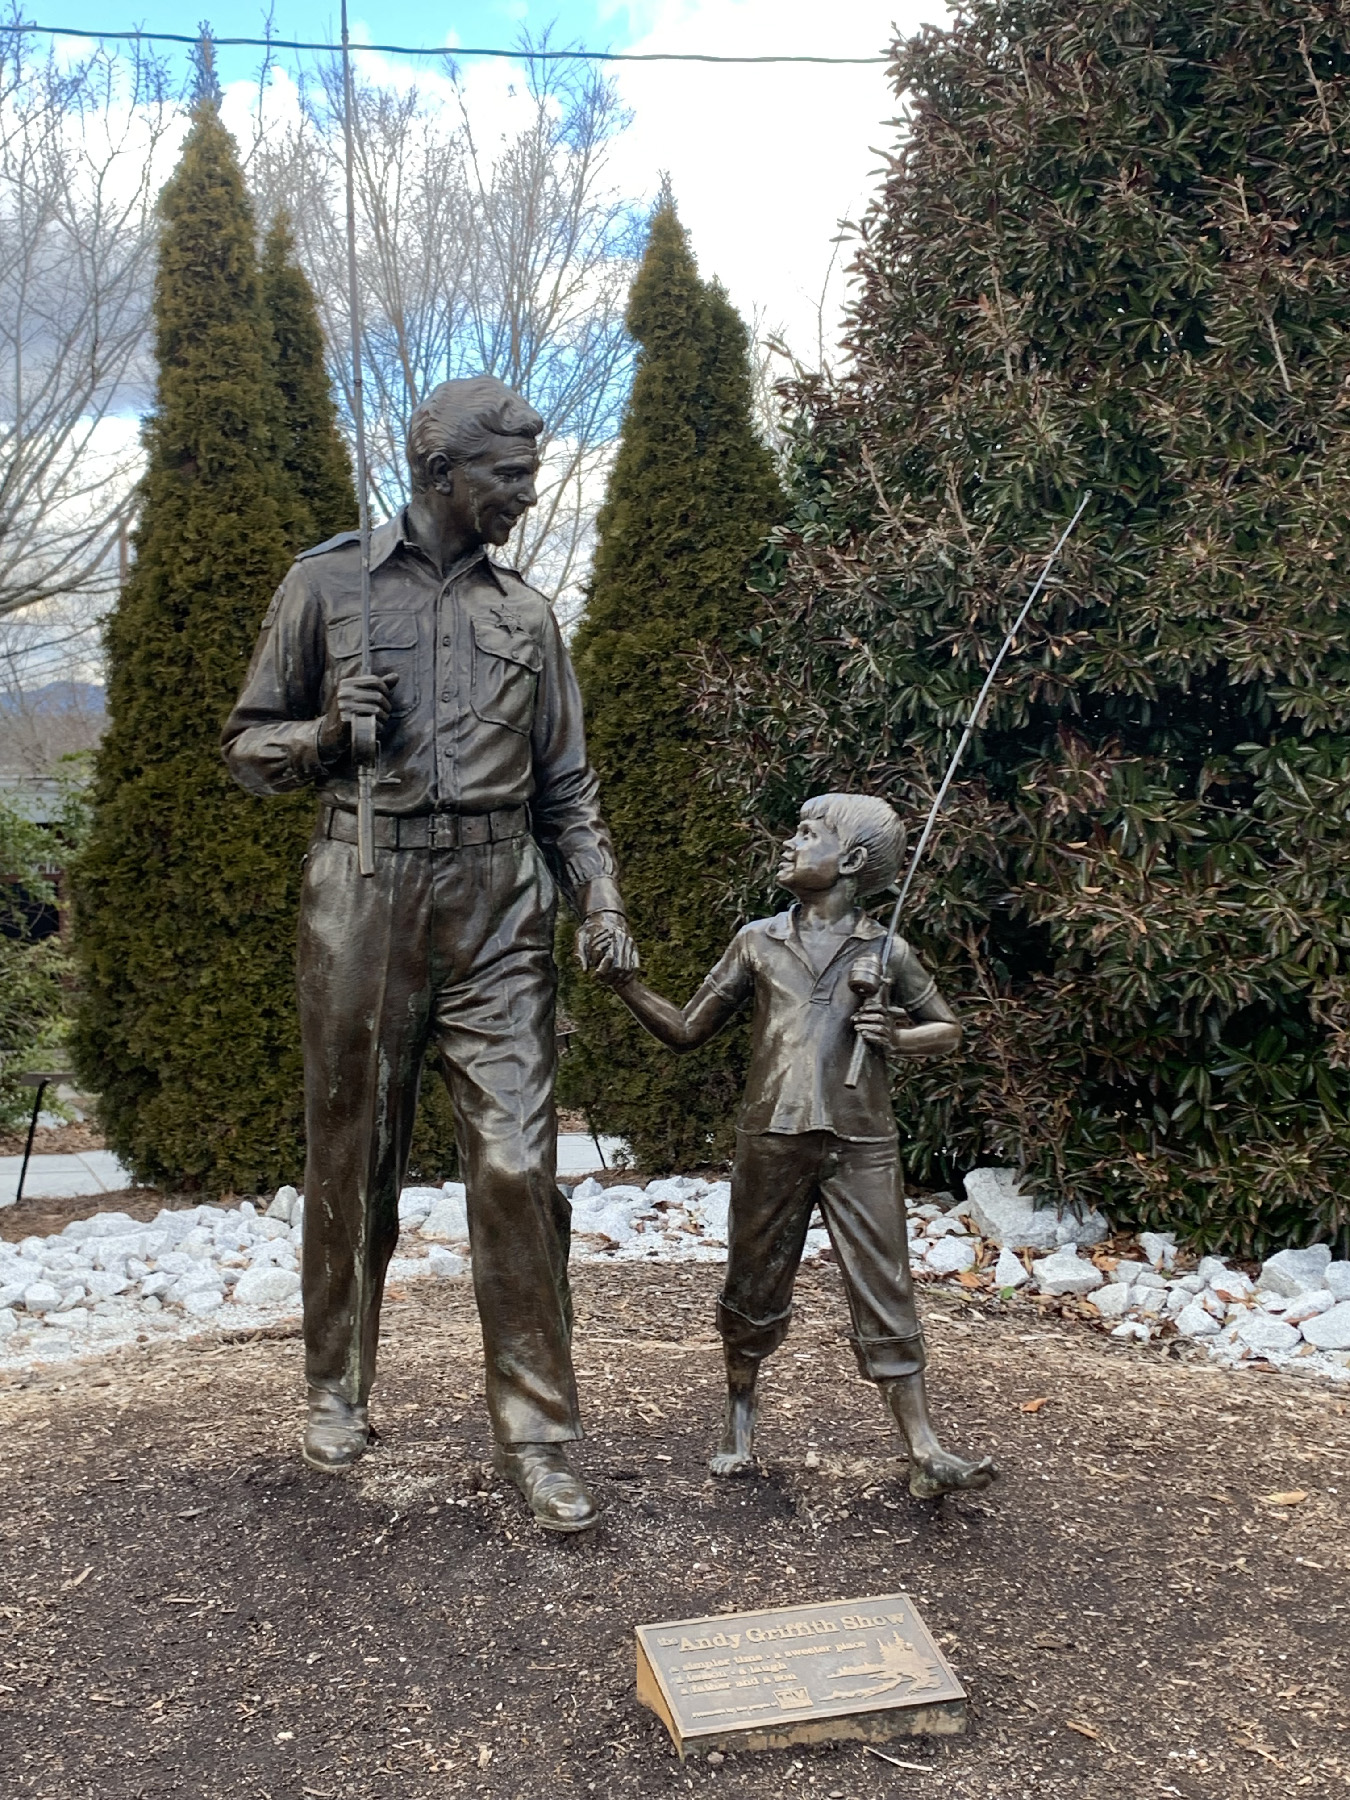 Statues of Andy Griffith (Sheriff Andy Taylor) and Ron Howard (Opie), stars of “The Andy Griffith Show,” are a photo op for tourists in front of the Andy Griffith Museum and Playhouse in Mount Airy, North Carolina.